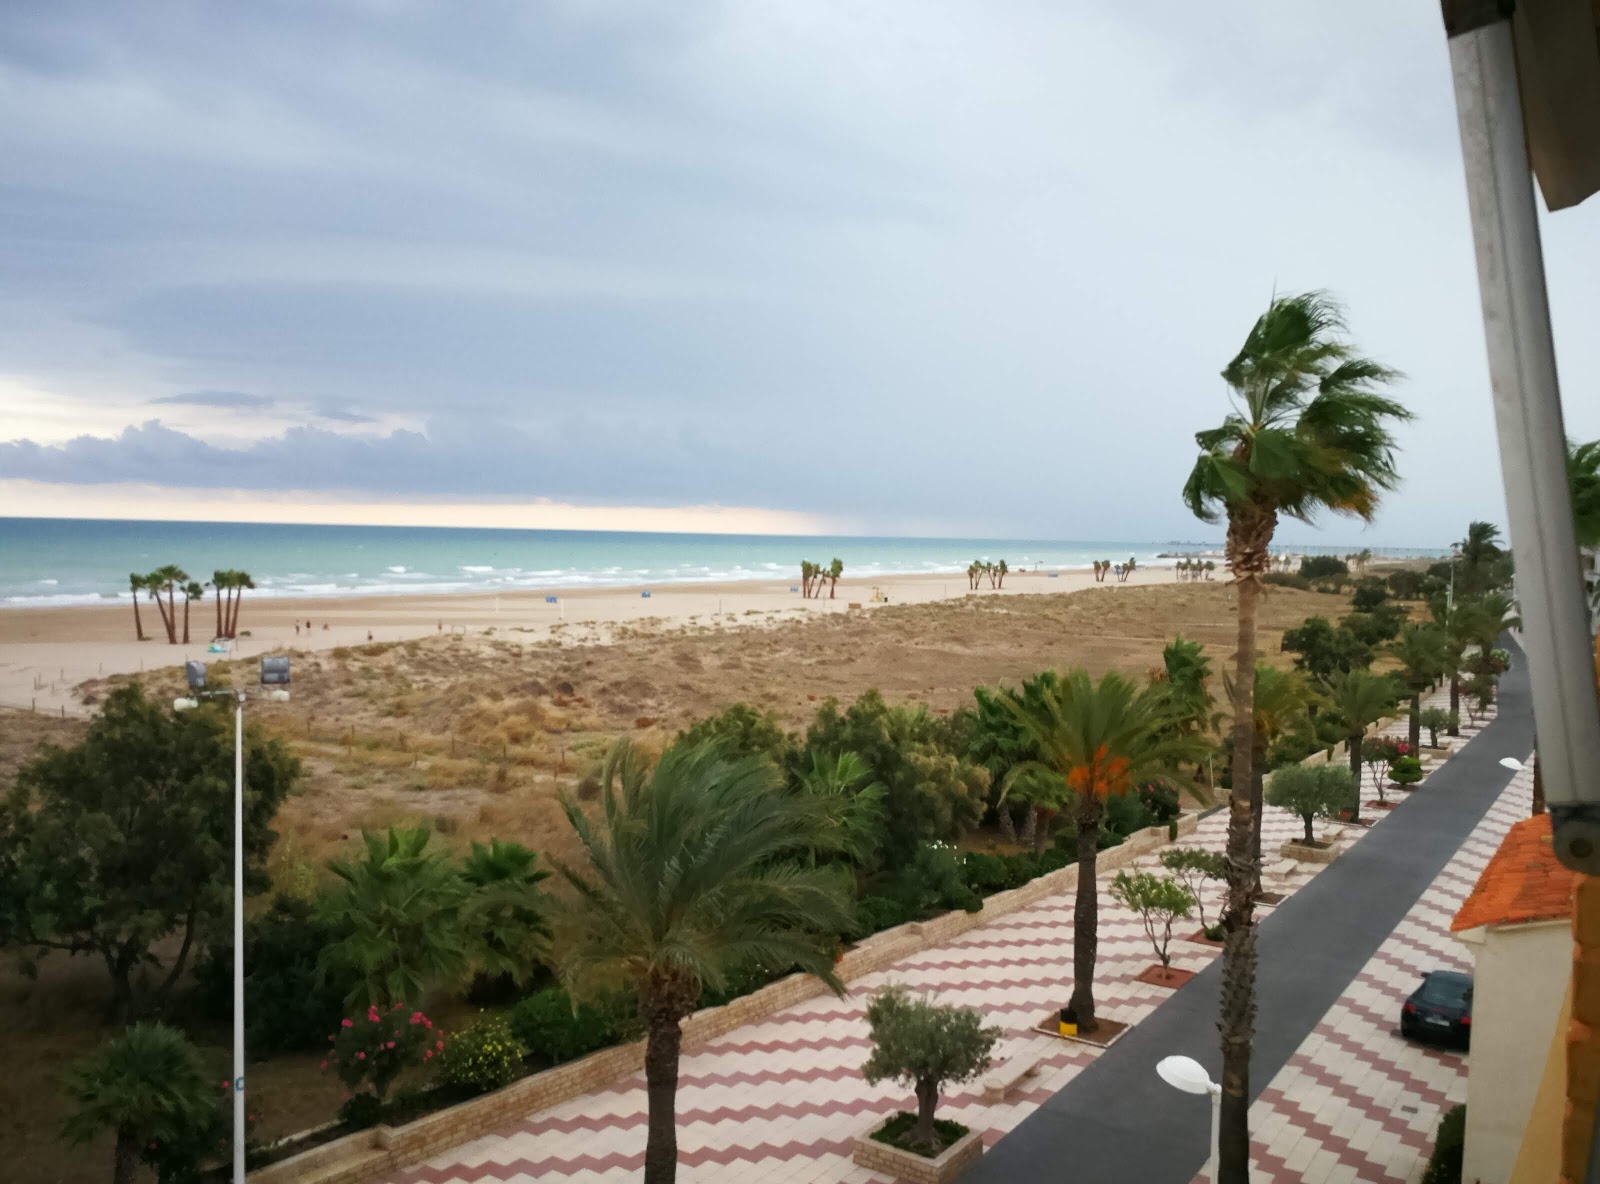 Photo of Canet Playa and the settlement